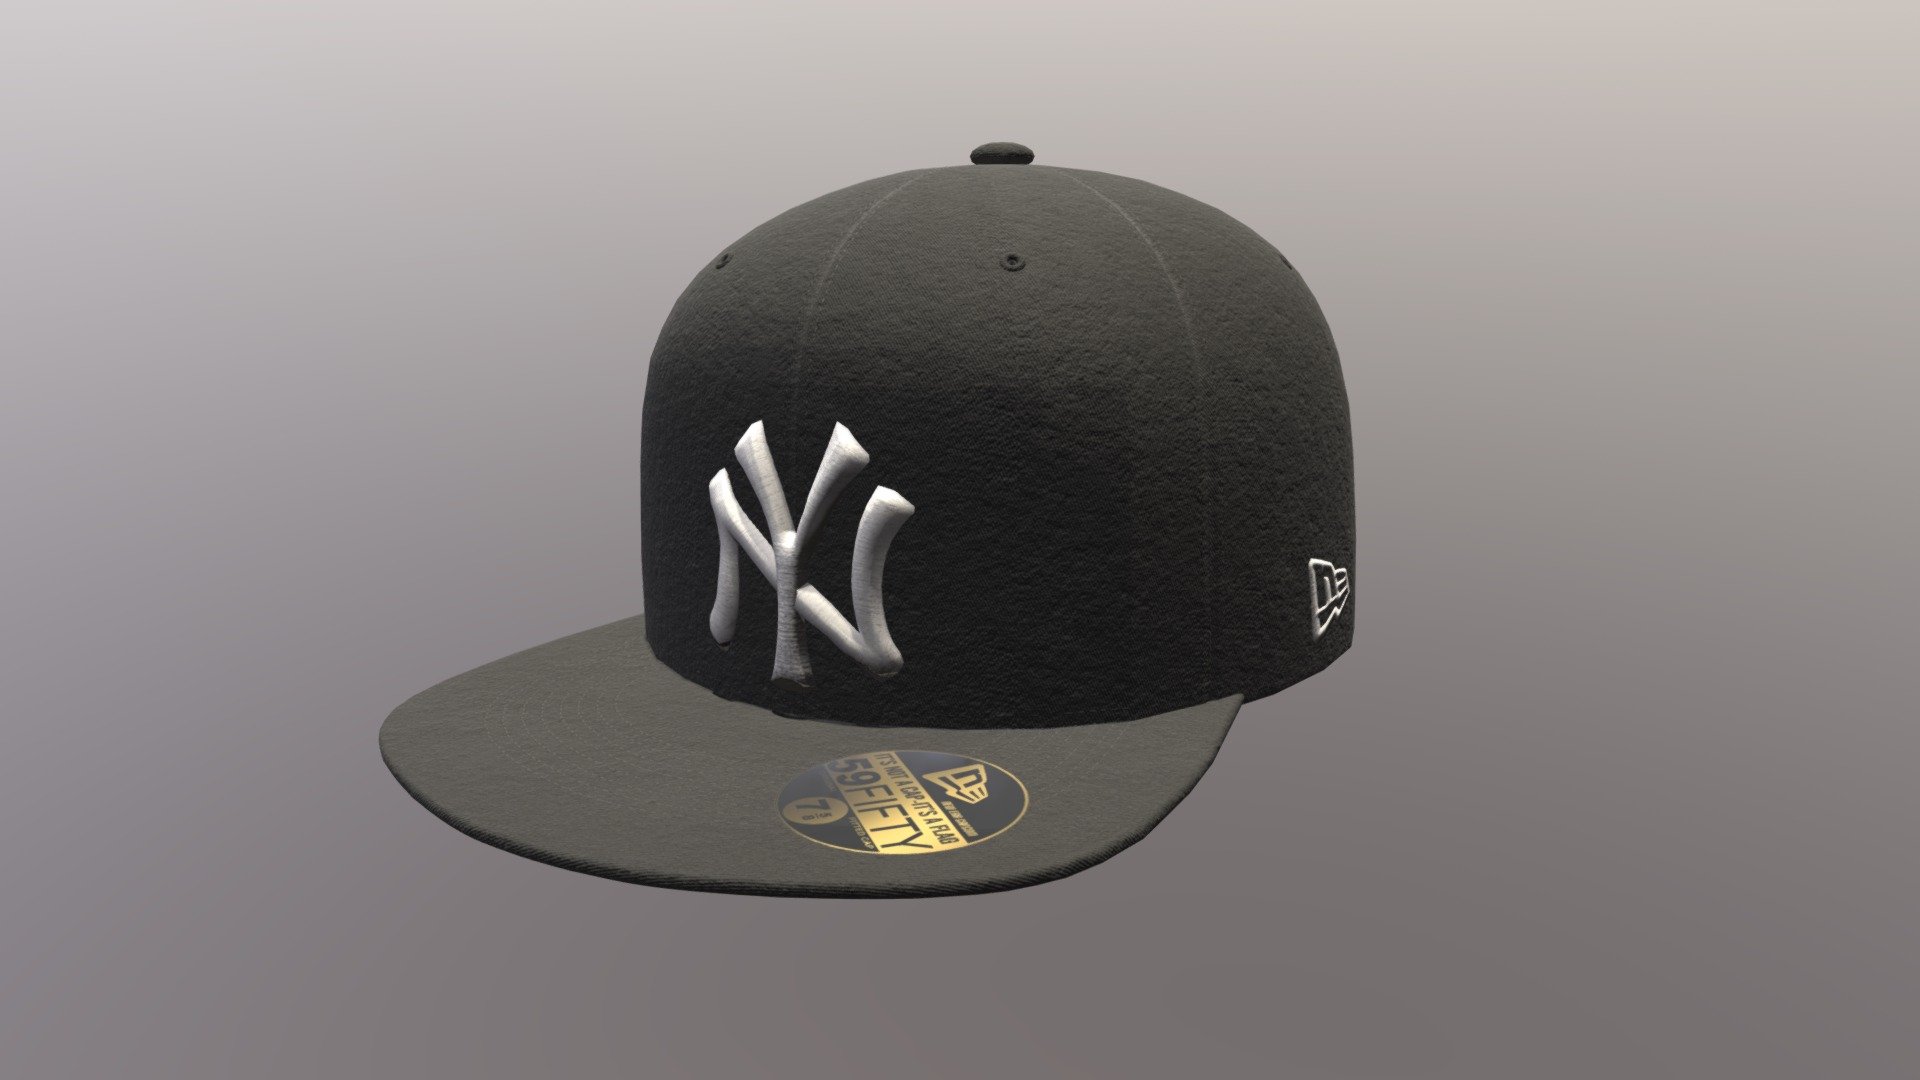 New Era Baseball Cap (New York Yankees)

High Poly to Low Poly model with true detail 3d model